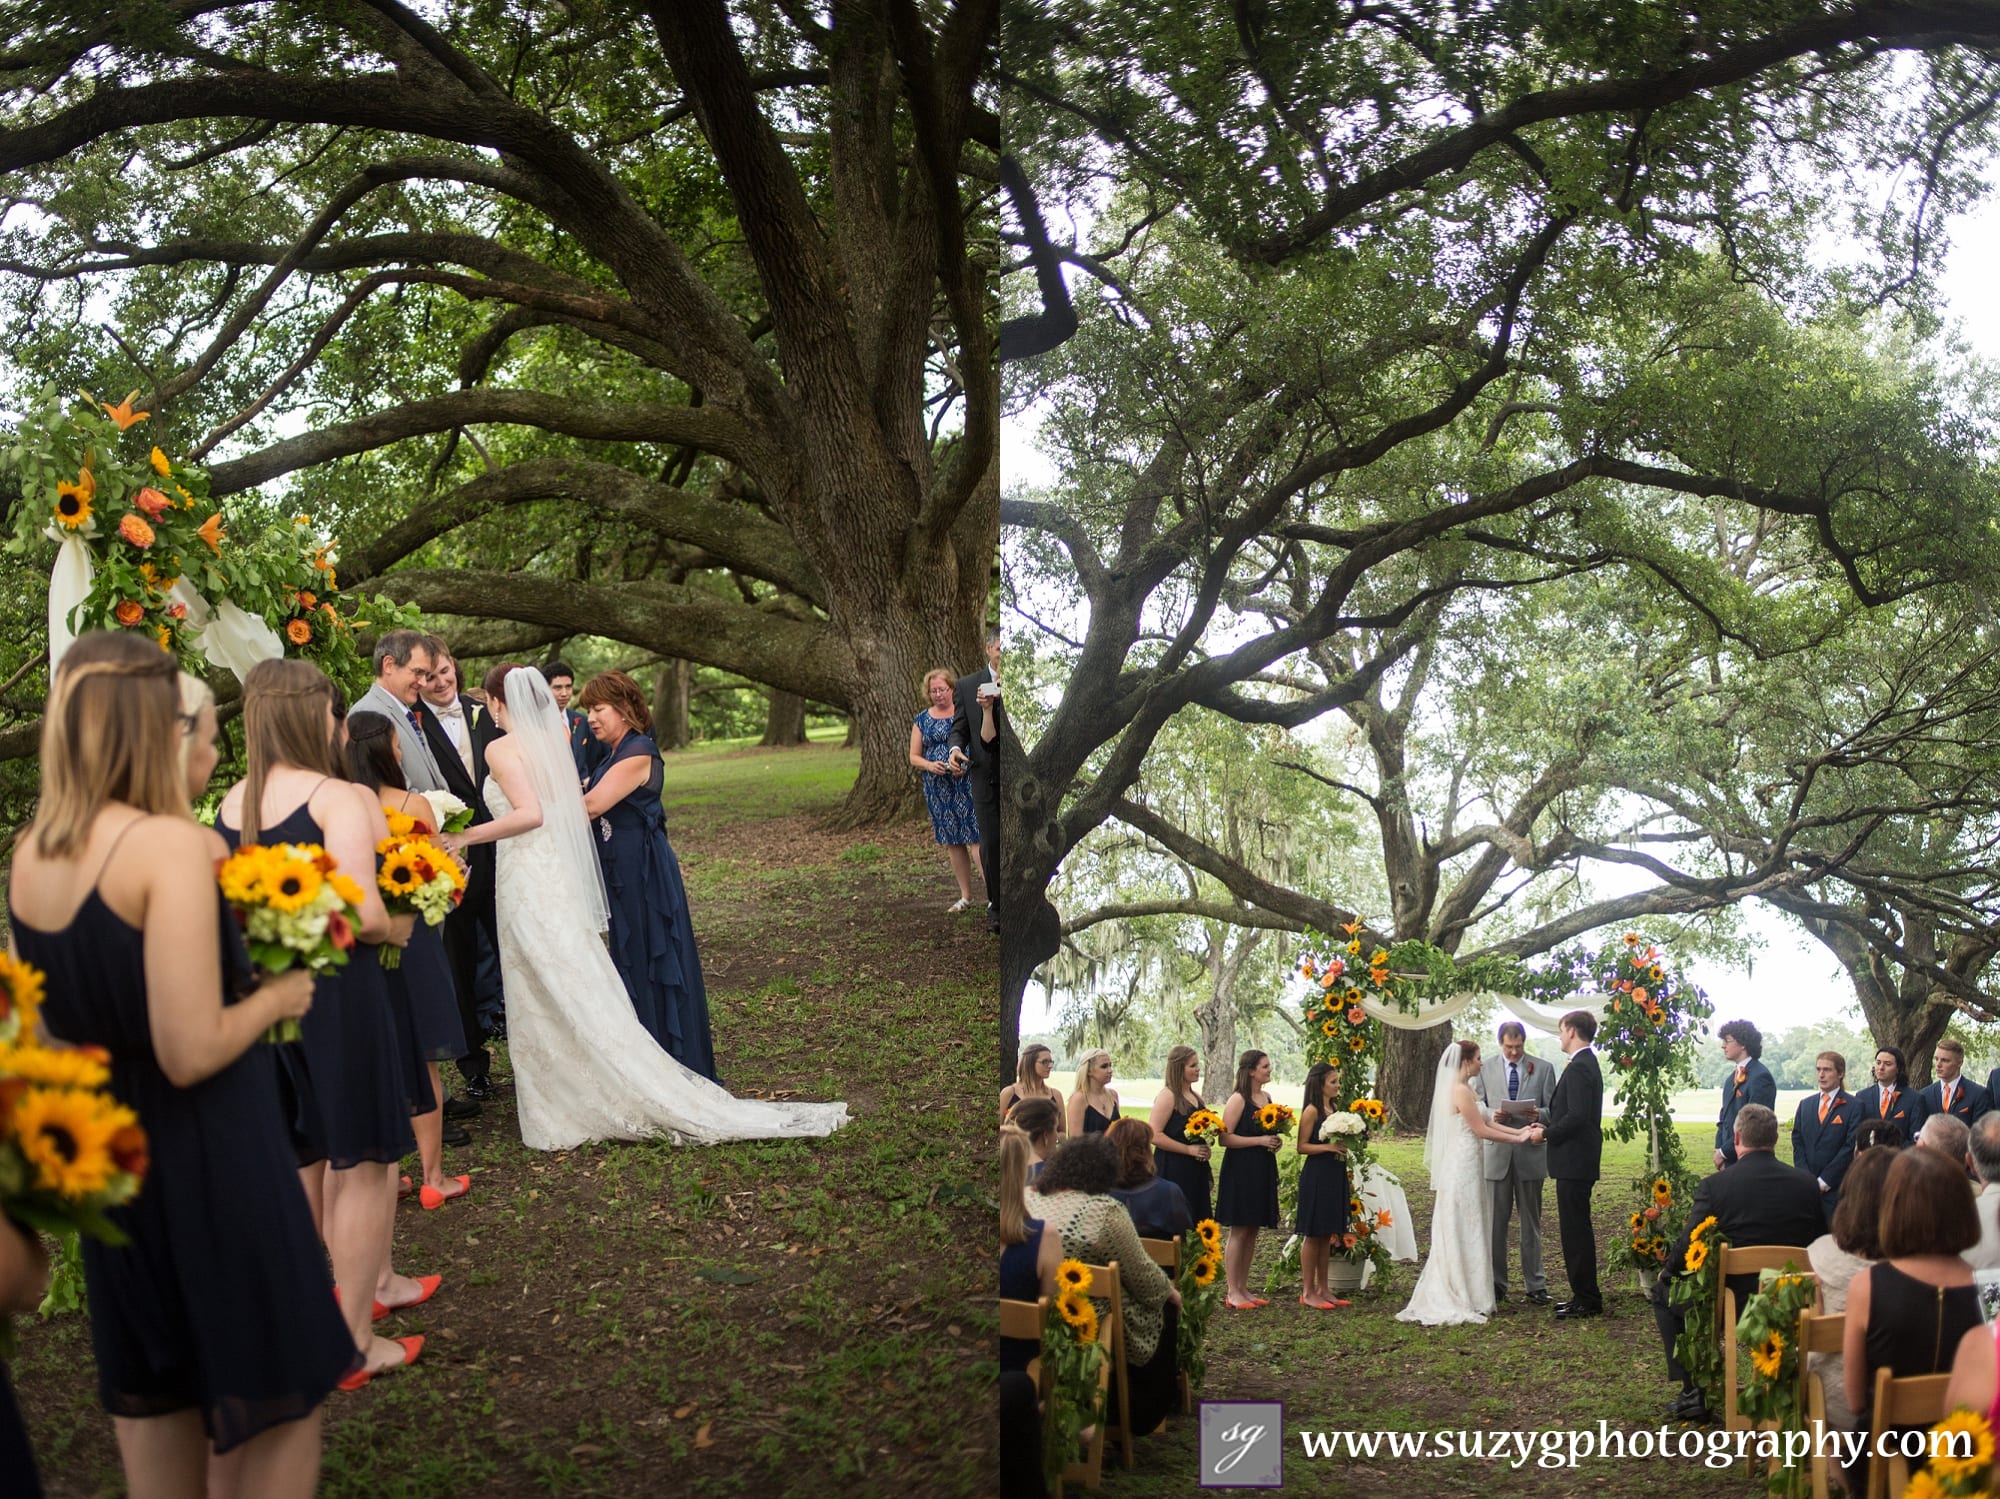 View More: http://suzygphotography.pass.us/emily--kevin-wedding